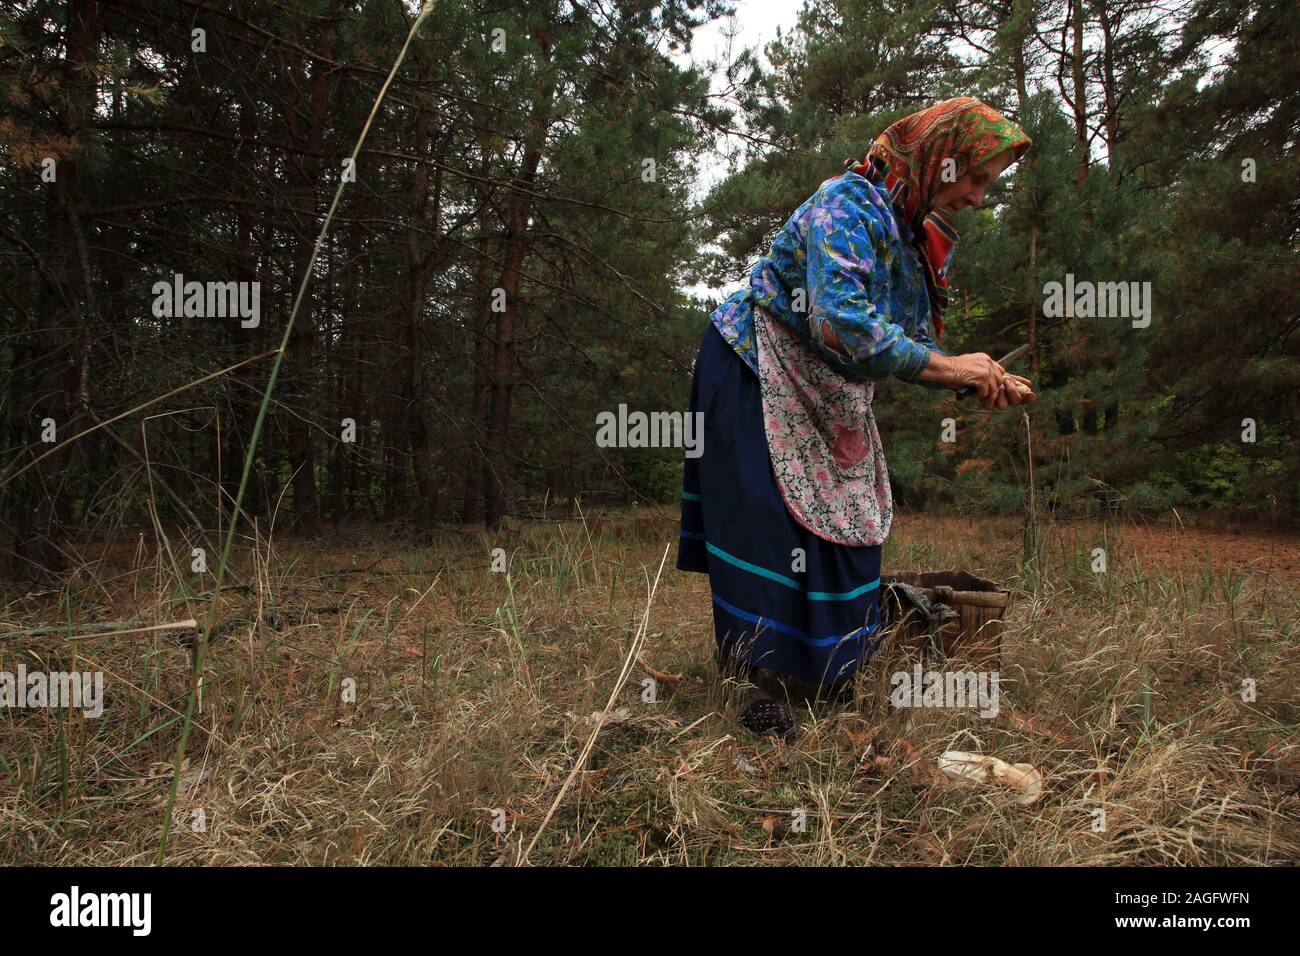 Hanna Zavorotnya while picking mushrooms in the forests around her village Kupovate in the Chernobyl Exclusion Zone. She is a self settler (Samosely), one of the babushkas who refused to leave the Zone. In the summer after the evacuation (following the Chernobyl disaster 1986) she and her family turned back to their farm. Zavorotnya lived through Stalin’s Holodomor – the genocide-by-famine of the 1930s that wiped out millions of Ukrainians – and then the Nazis in the 1940s. When asked about radiation, Zavorotnya replied: “Radiation doesn’t scare me. Starvation does.' Kupovate, Ukraine Stock Photo